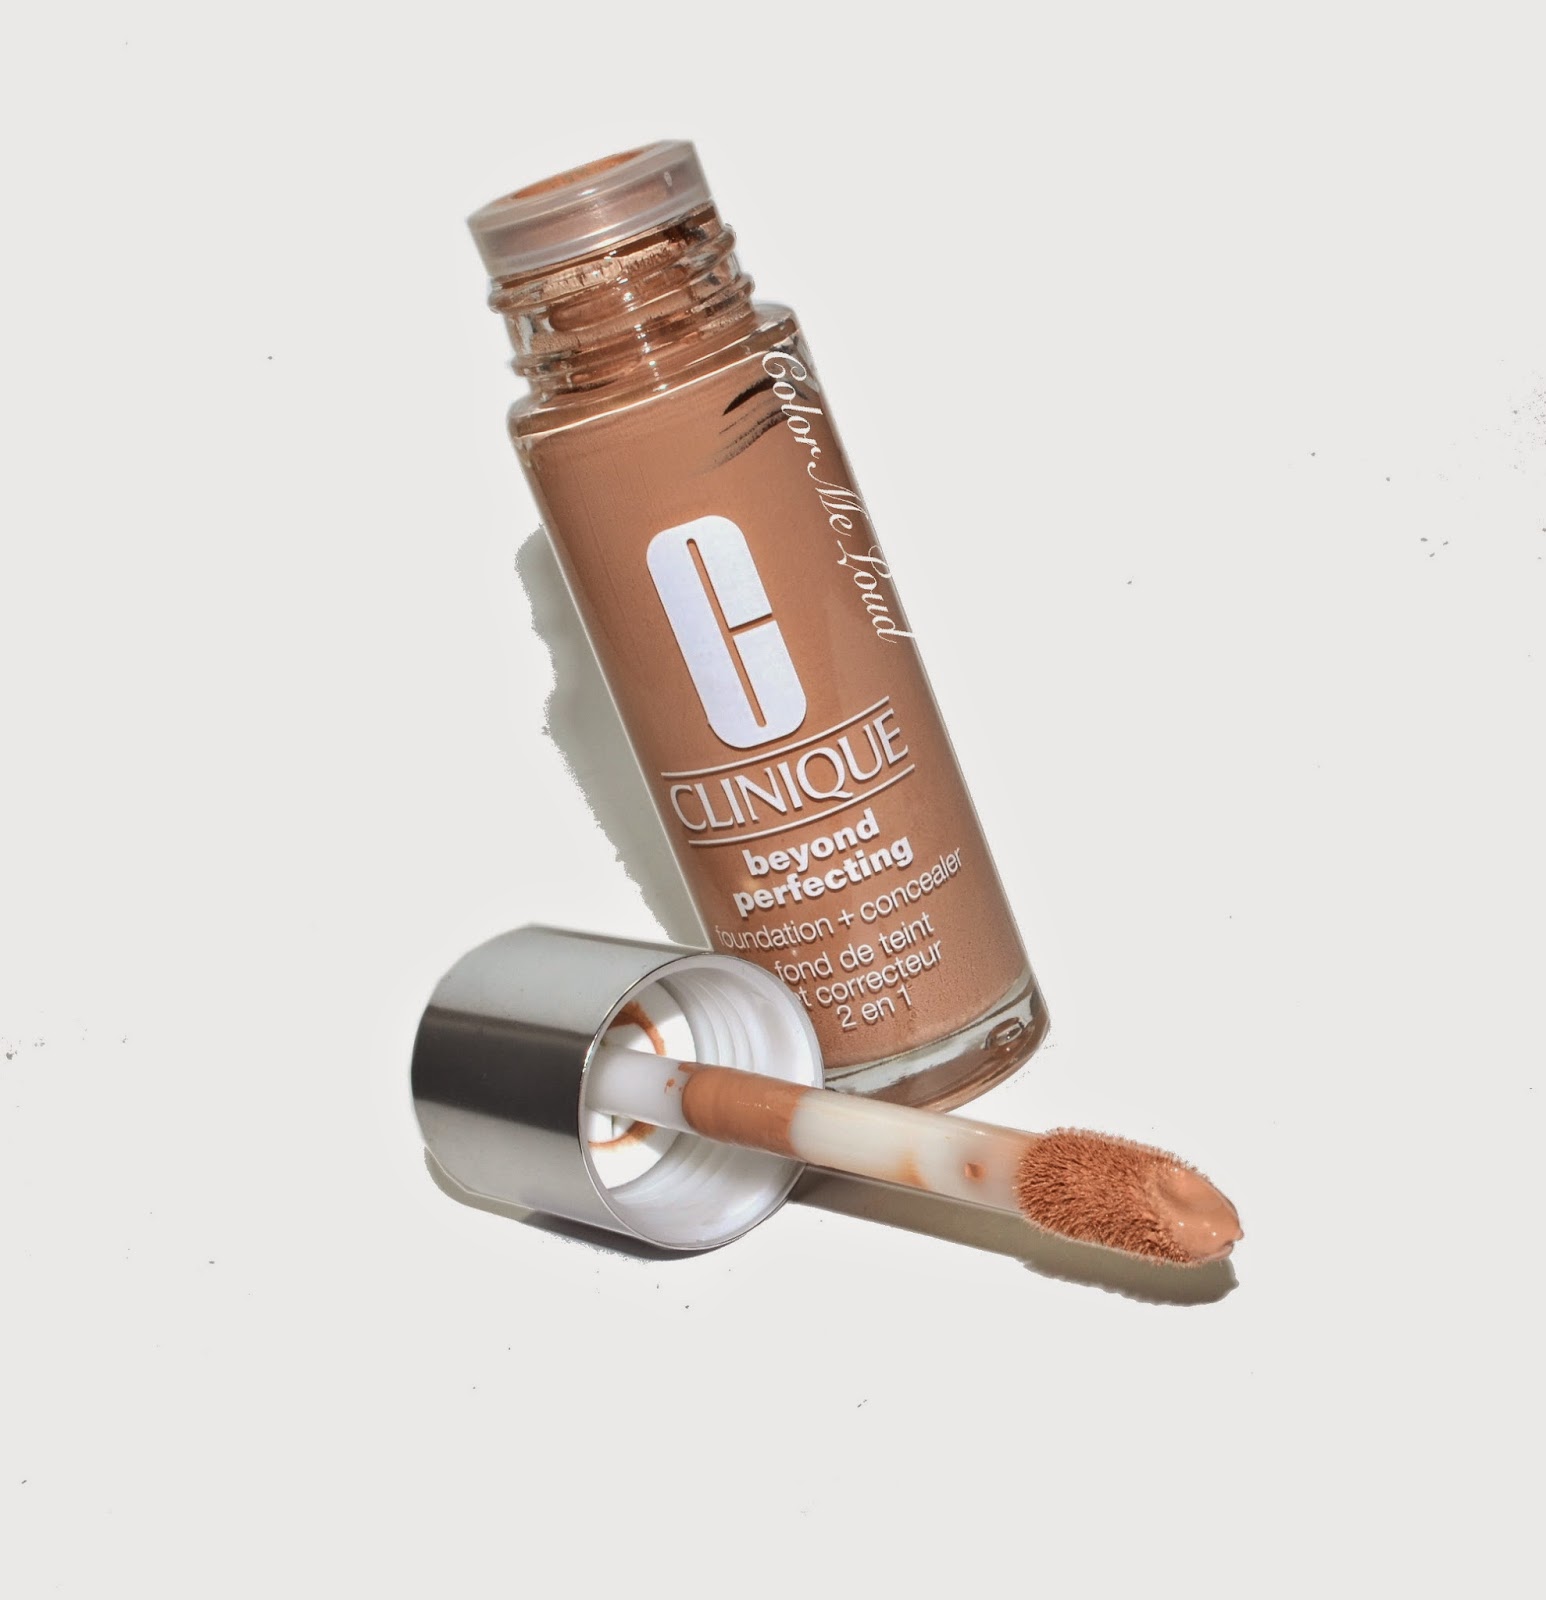 Clinique Beyond Perfecting Foundation and Concealer in Ivory, Review, Swatch & FOTD